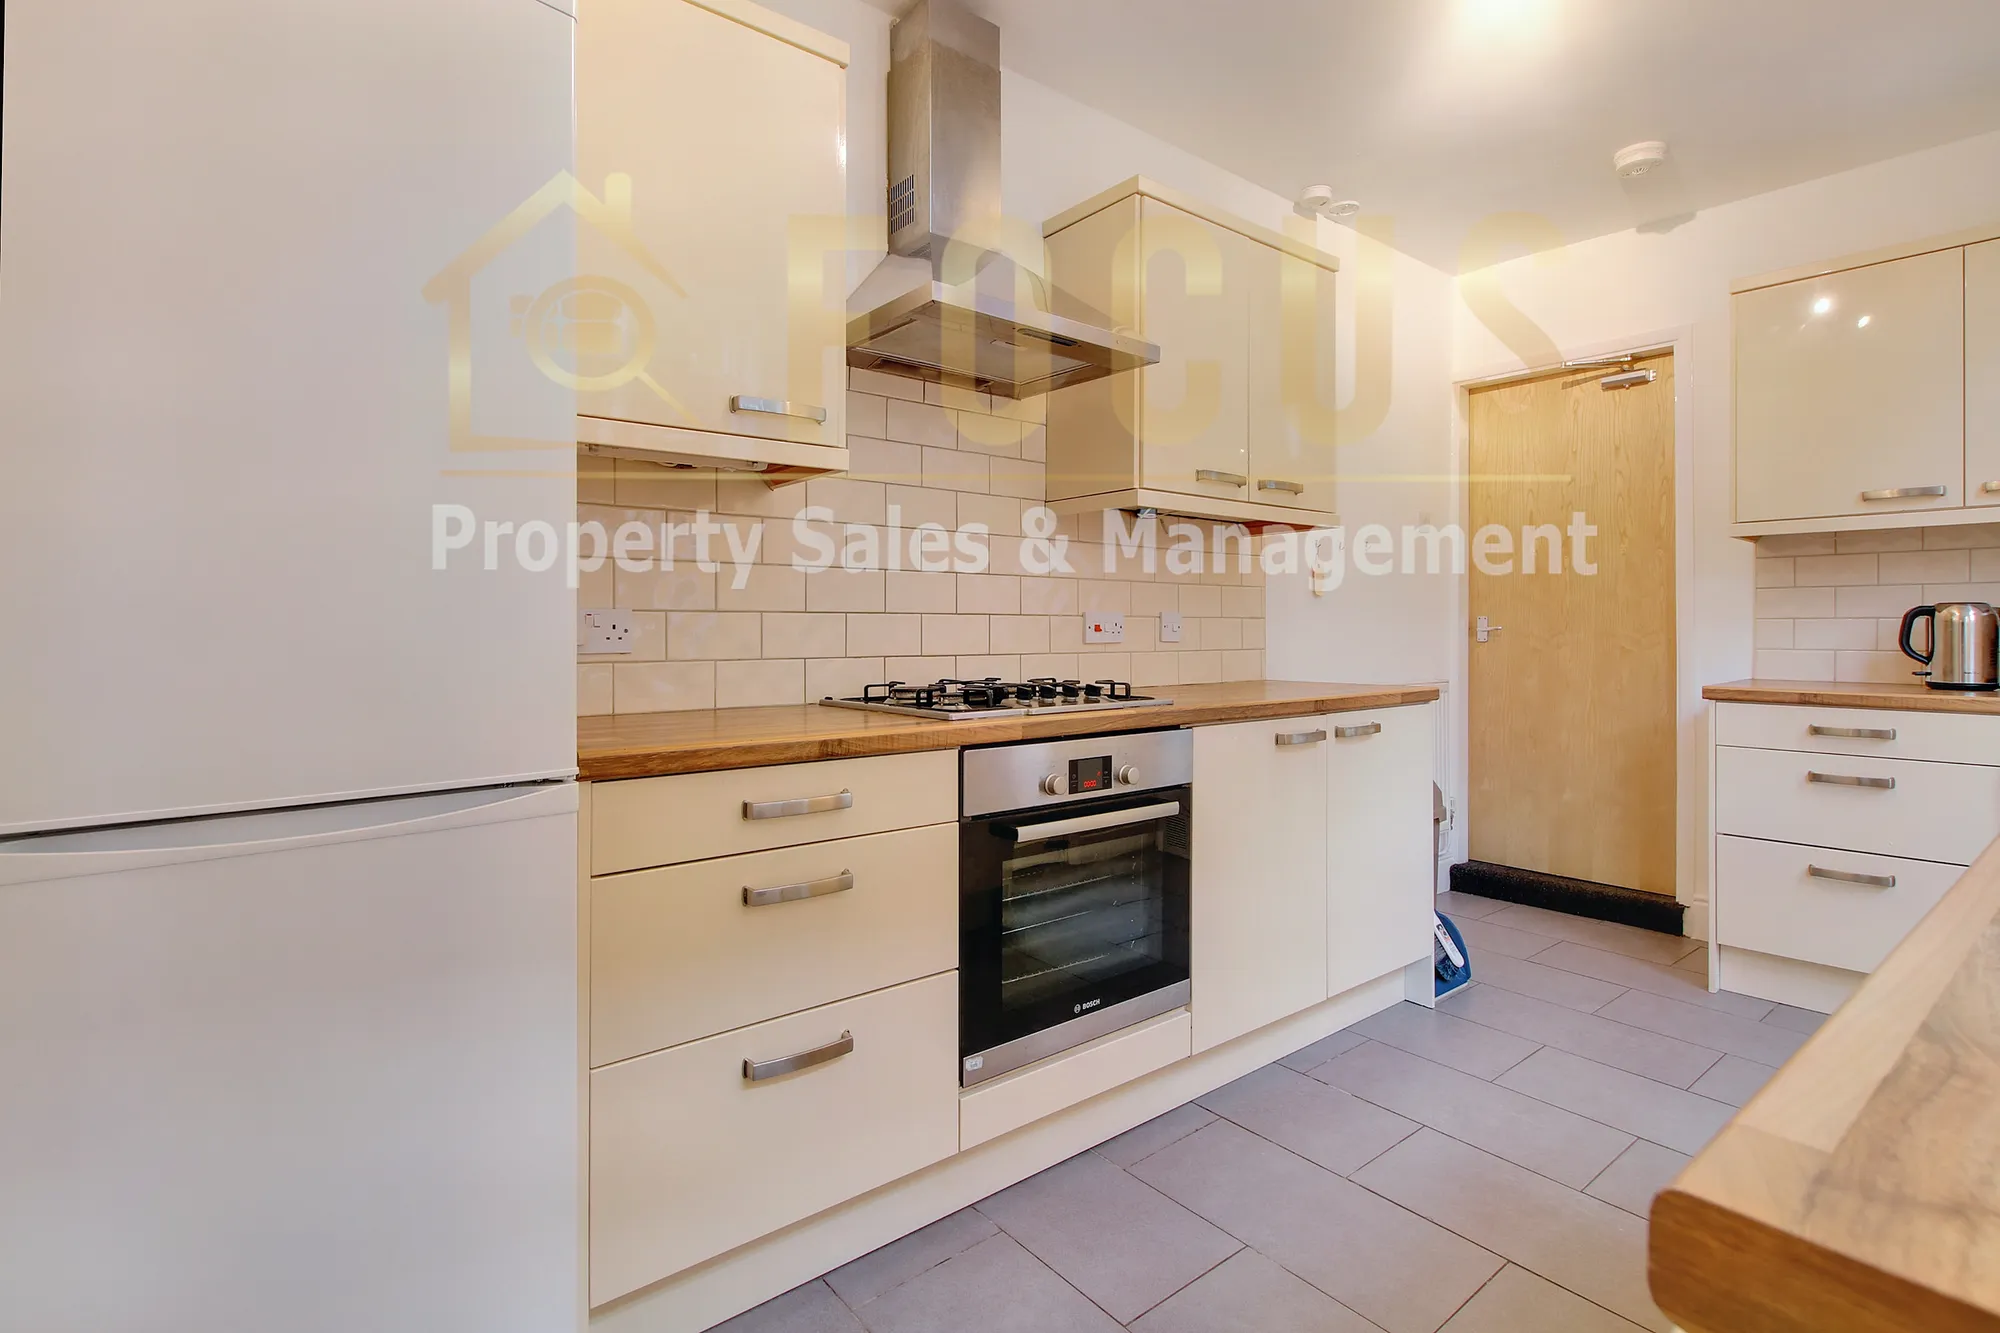 4 bed mid-terraced house to rent in Hartopp Road, Leicester  - Property Image 3